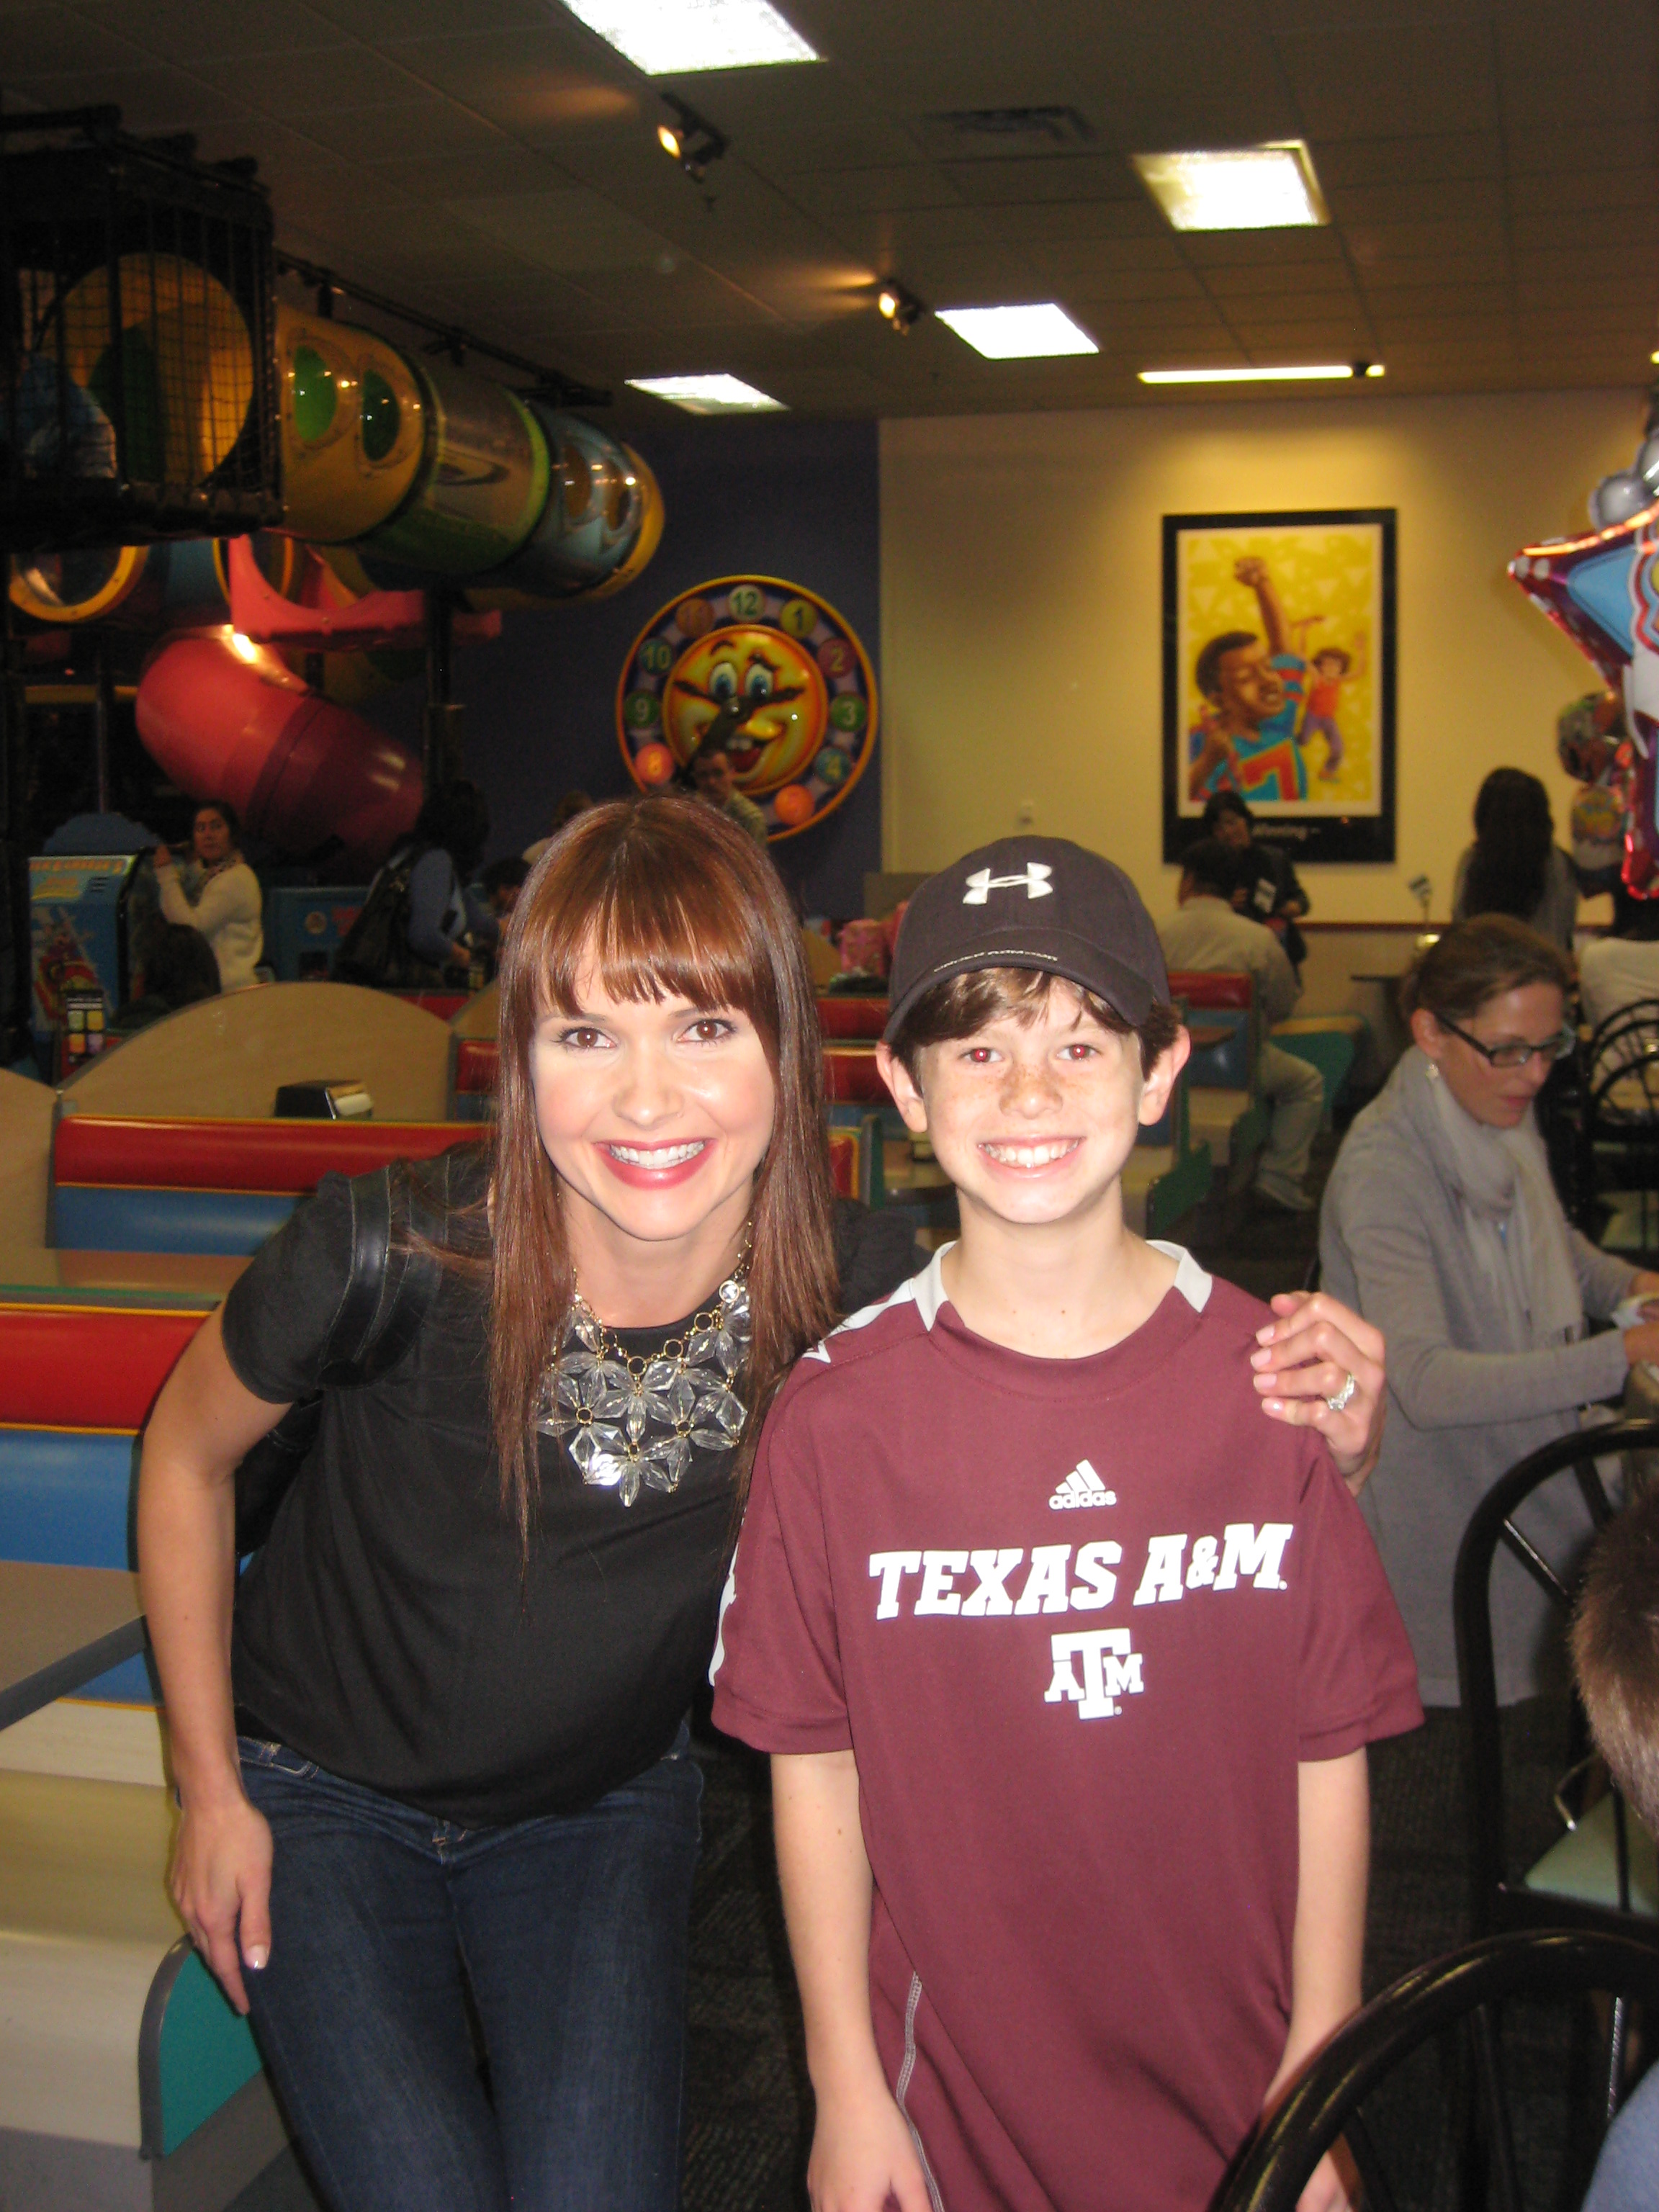 Drew Justice with Valerie Azlynn - Miss Crabtree from Rascals